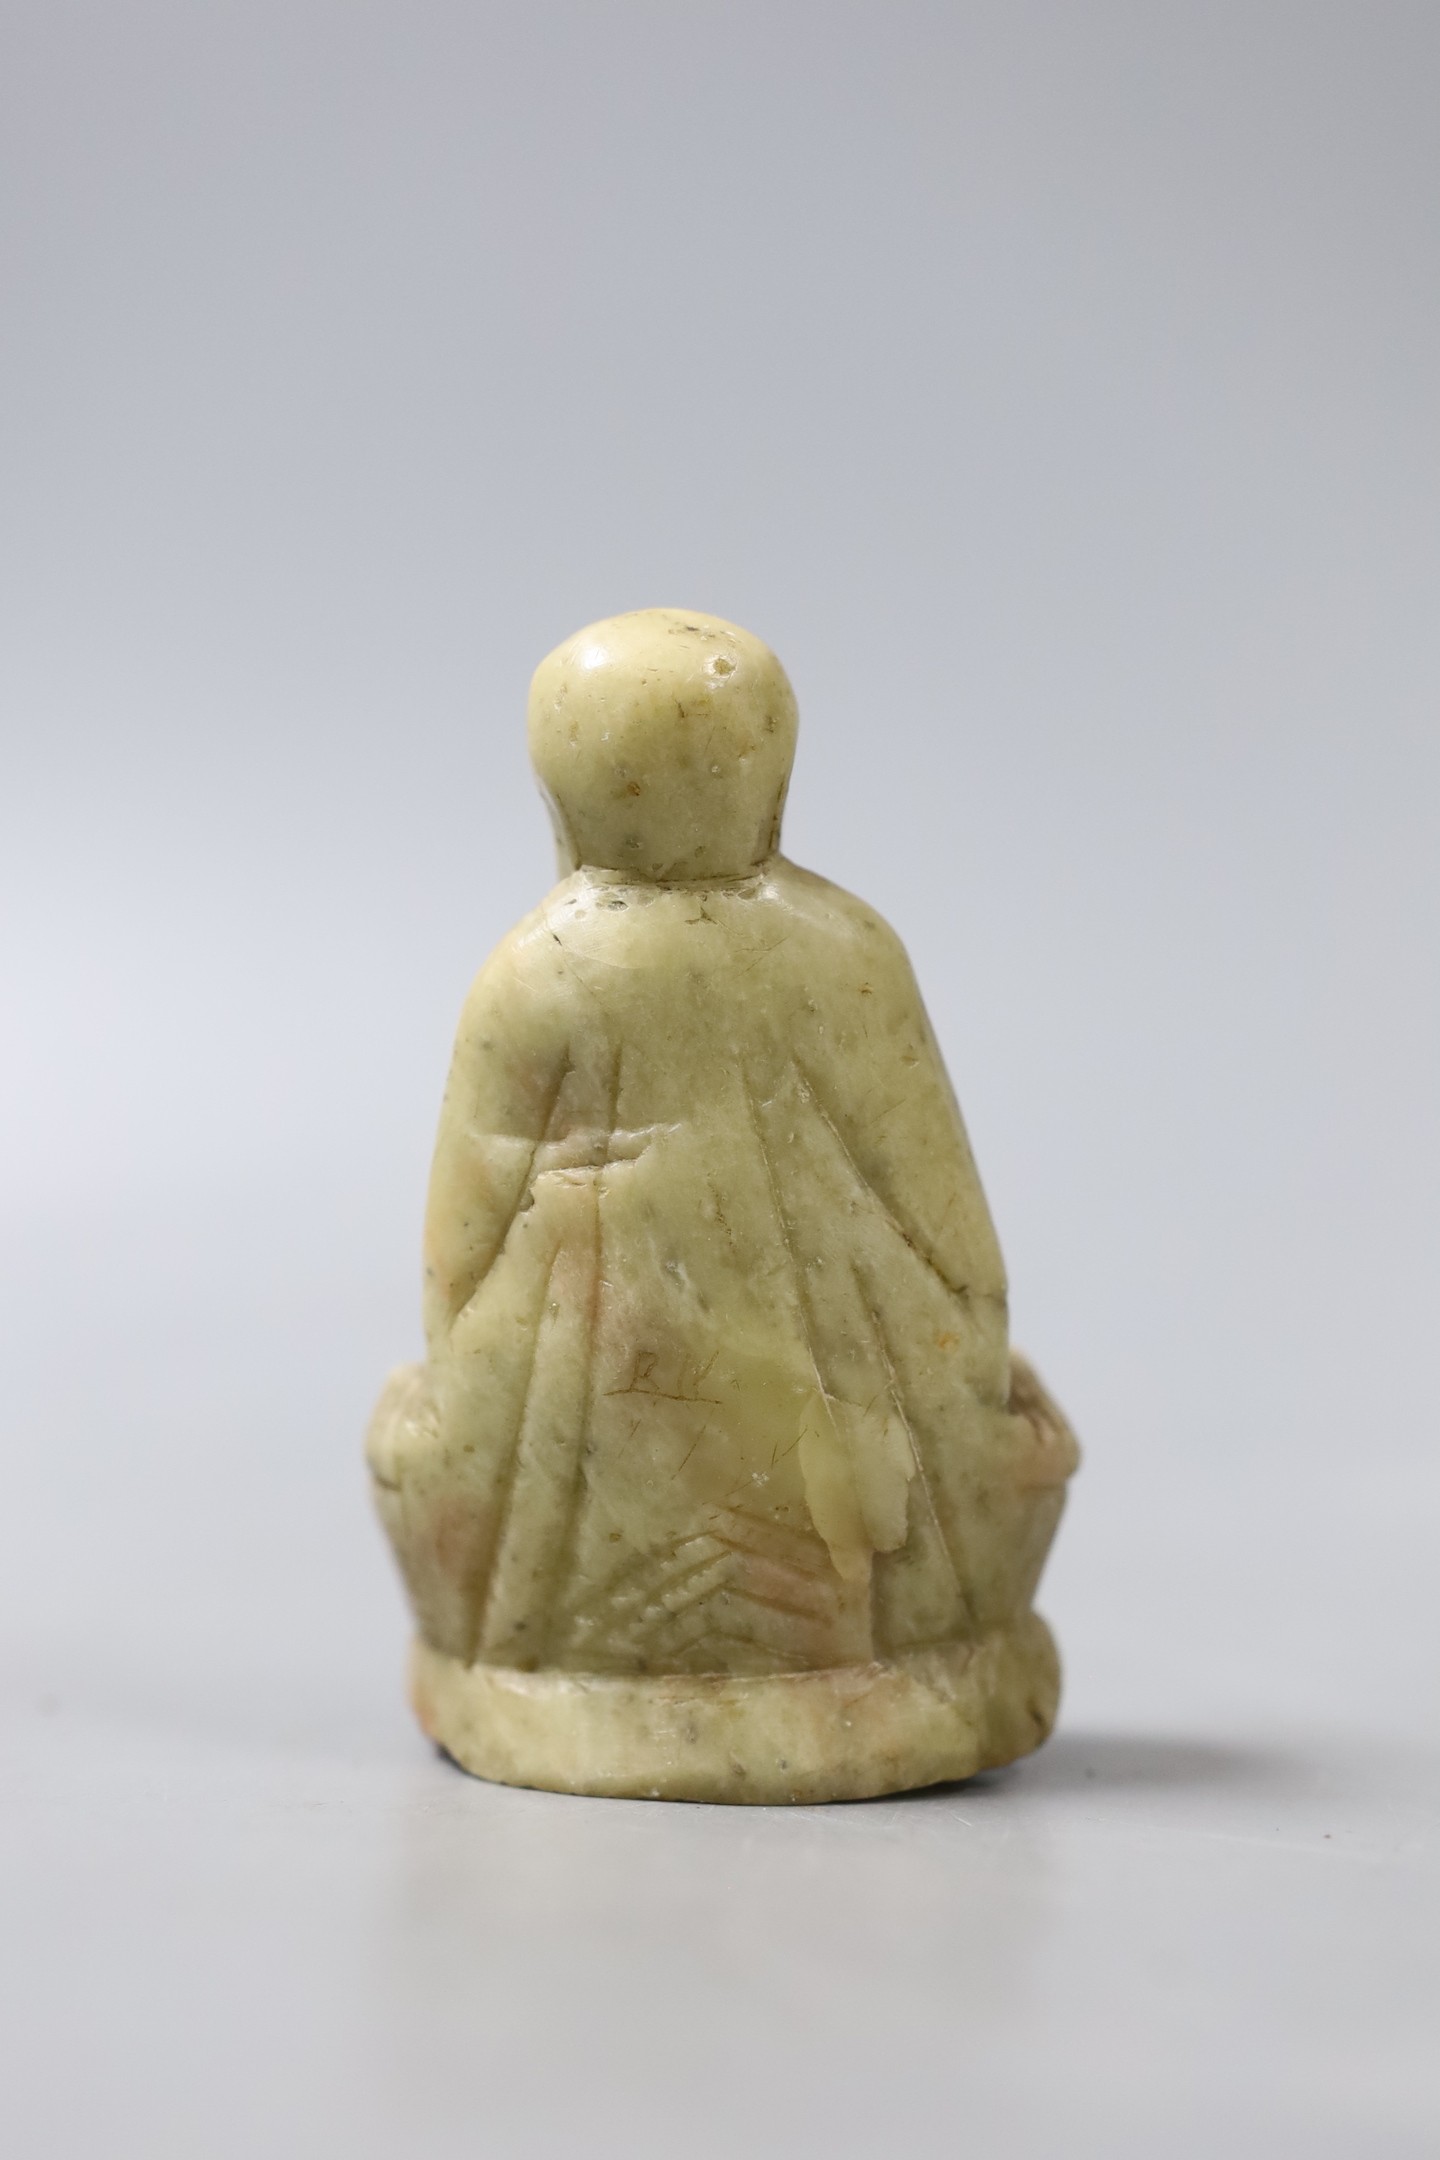 A carved soapstone figure of a seated smiling Buddha - 8cm tall - Image 2 of 3